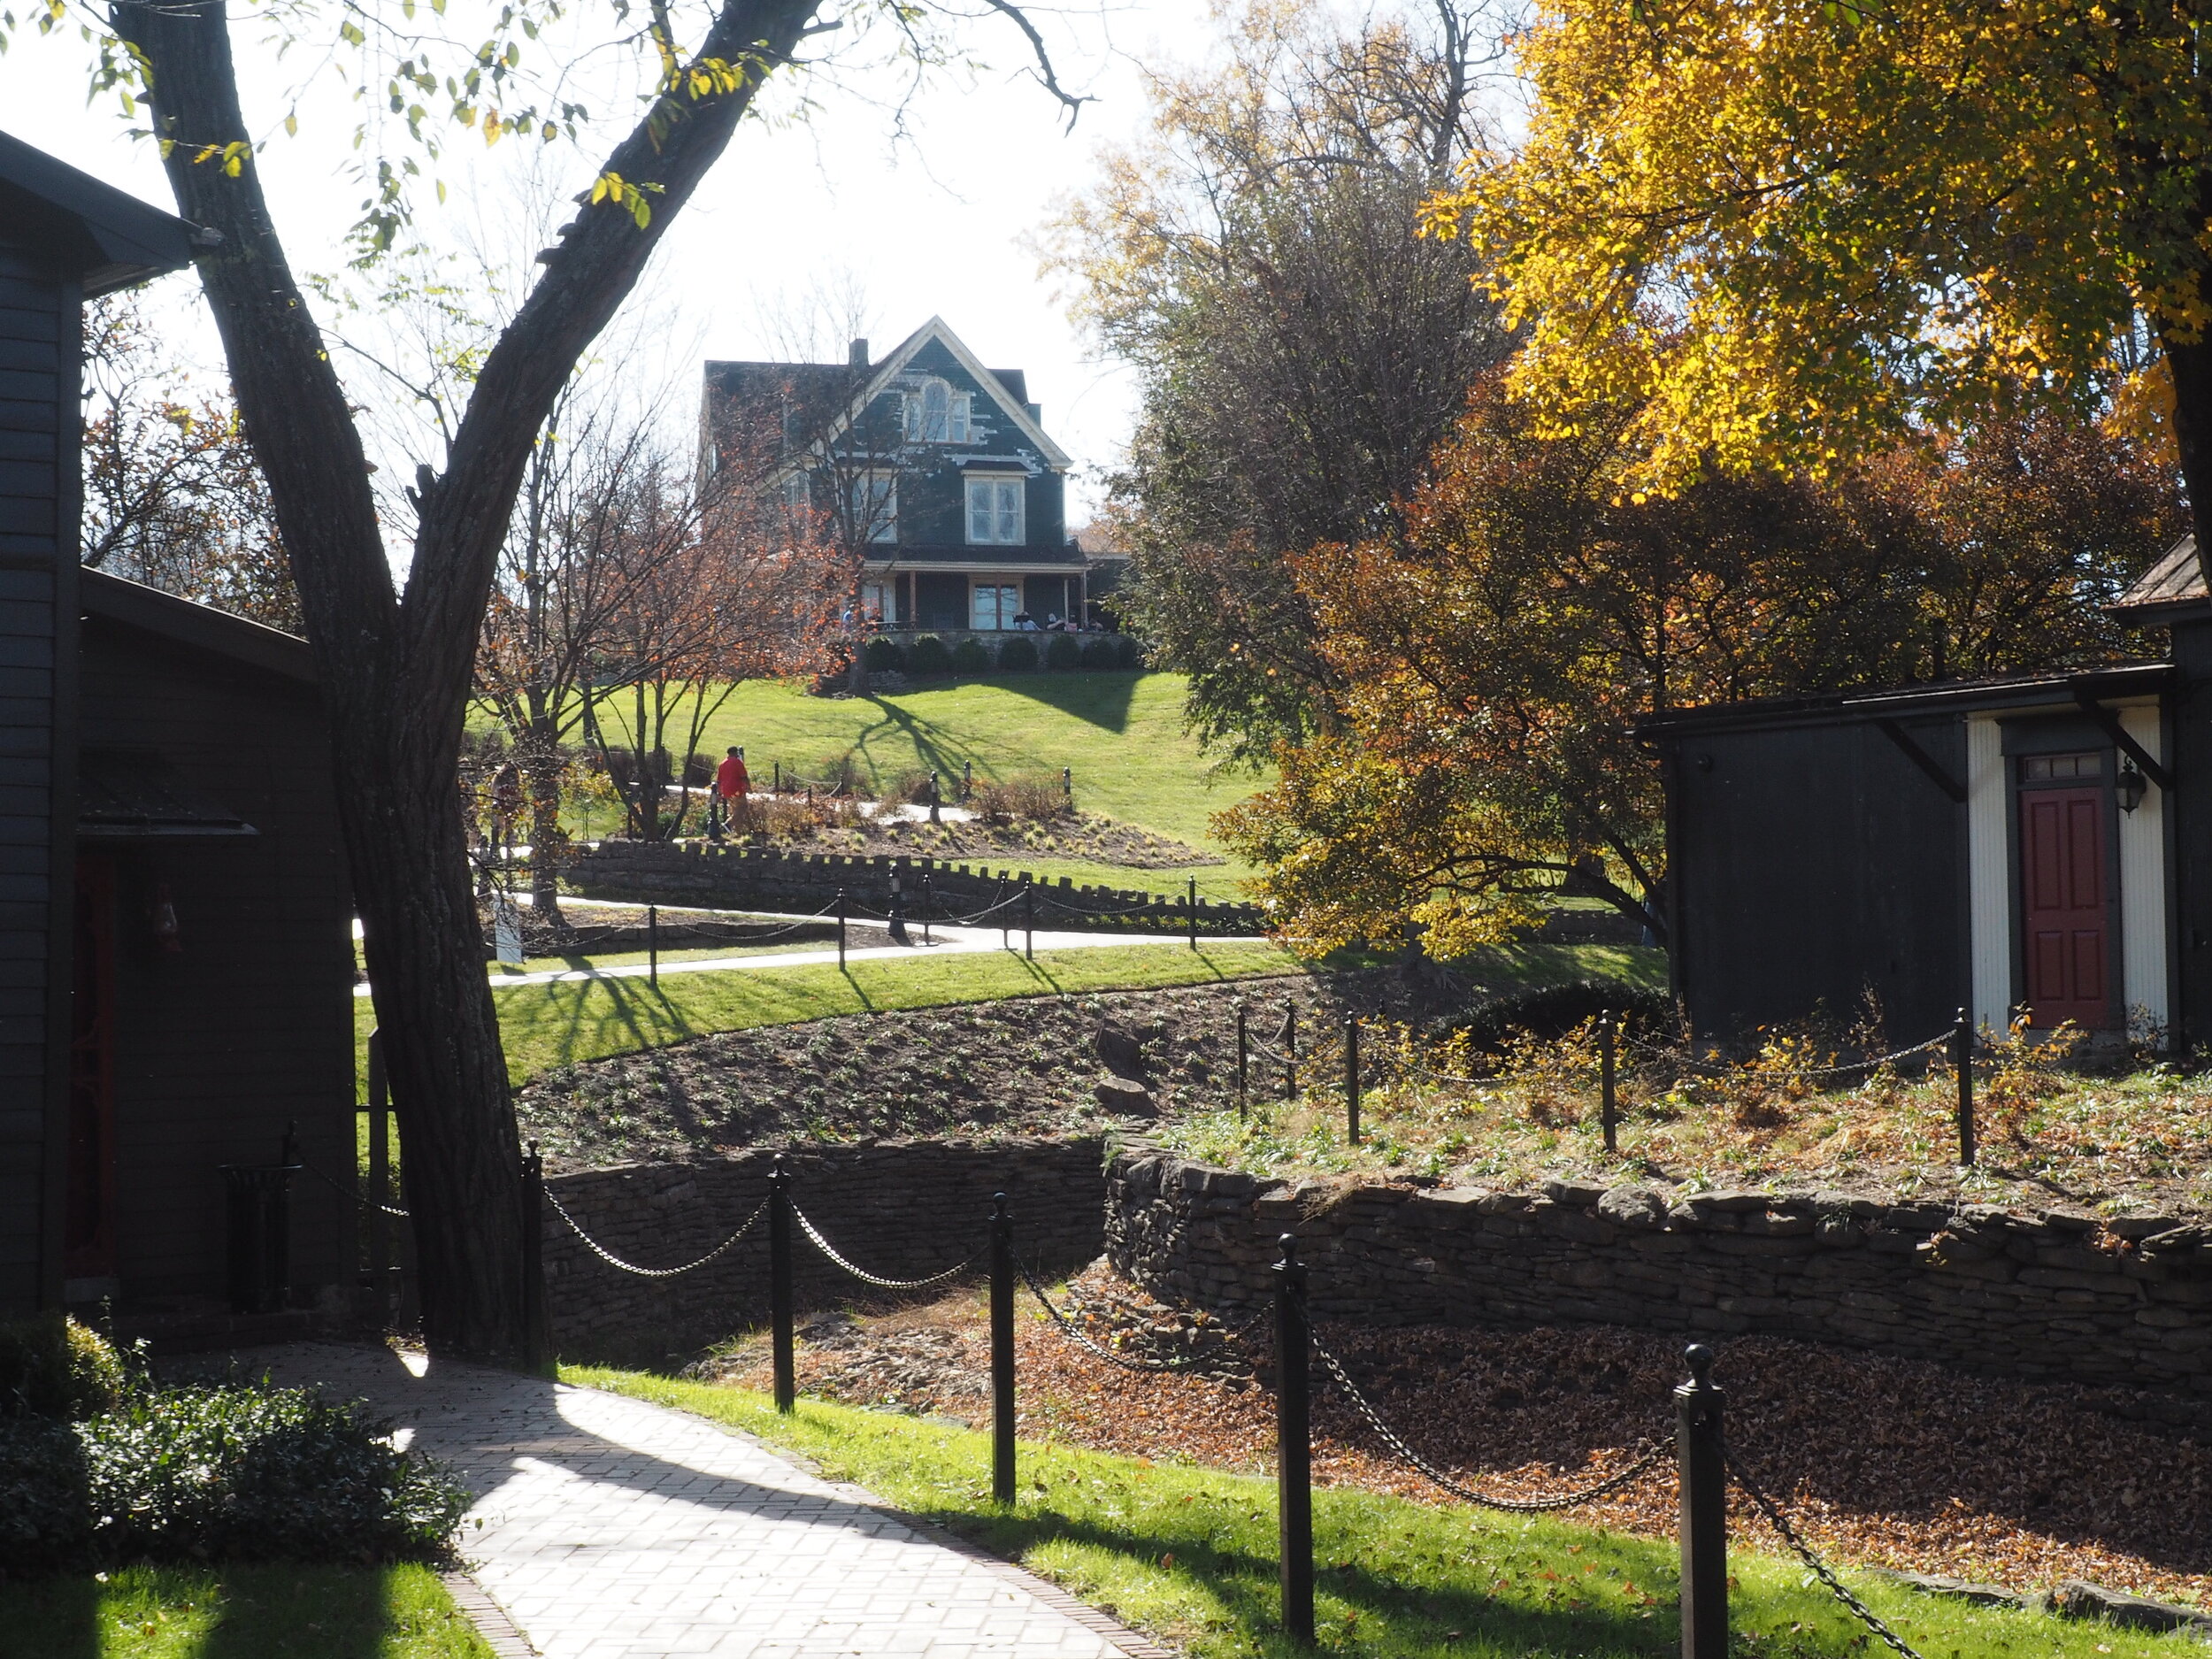 Grounds at Maker’s Mark in Loretto, KY